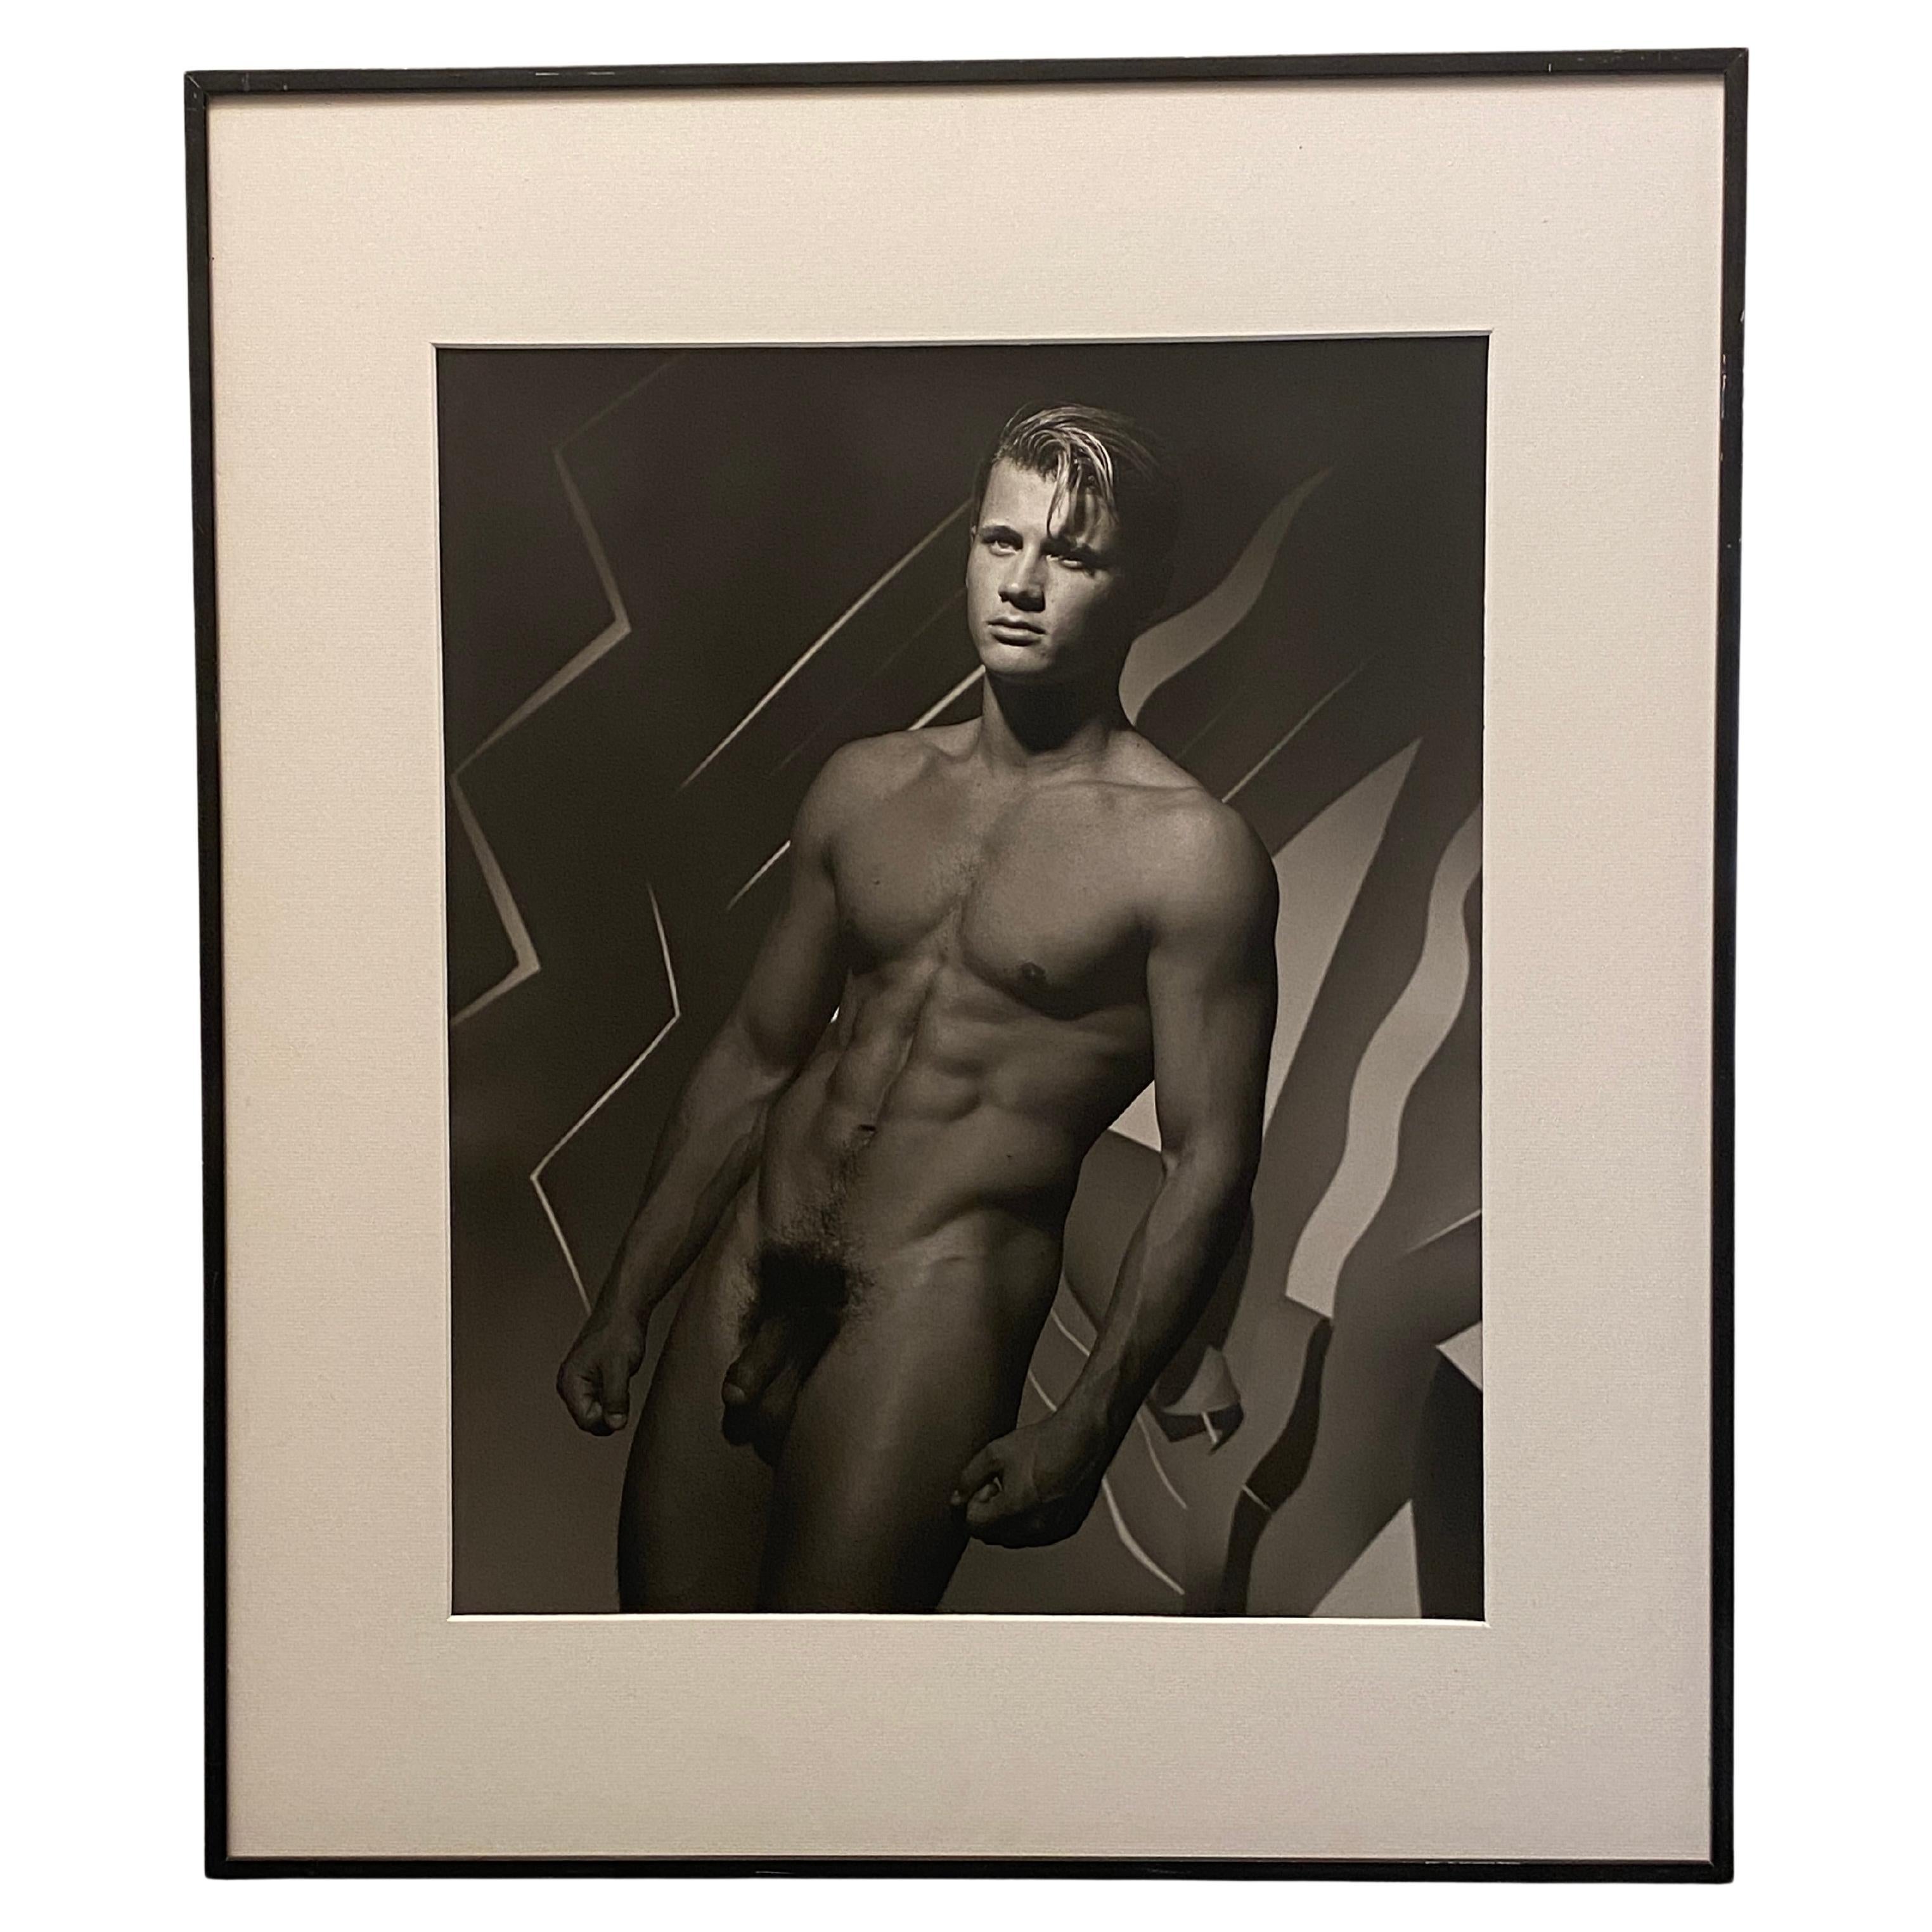 MICHAEL ROBERTS (1947-2023)

PLEASE NOTE: This photograph is a one of a kind original photograph. Every photograph in the show was available to purchase, and only one of each was printed. This large black and white hand printed silver gelatin